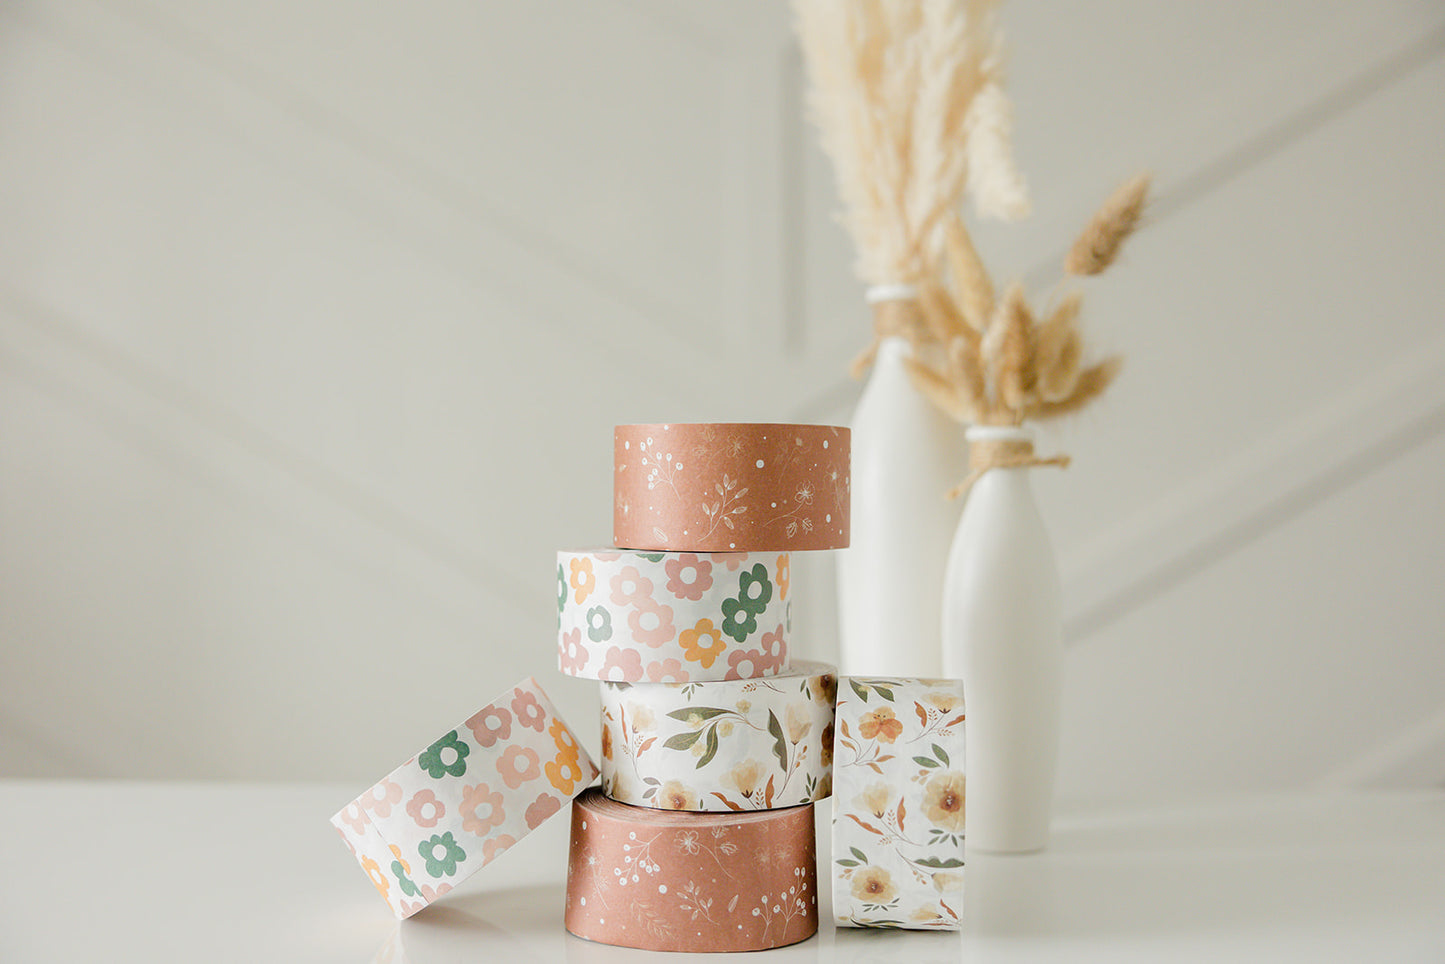 A stack of Packing Tape - Daisy Multi by impack.co on a white table.